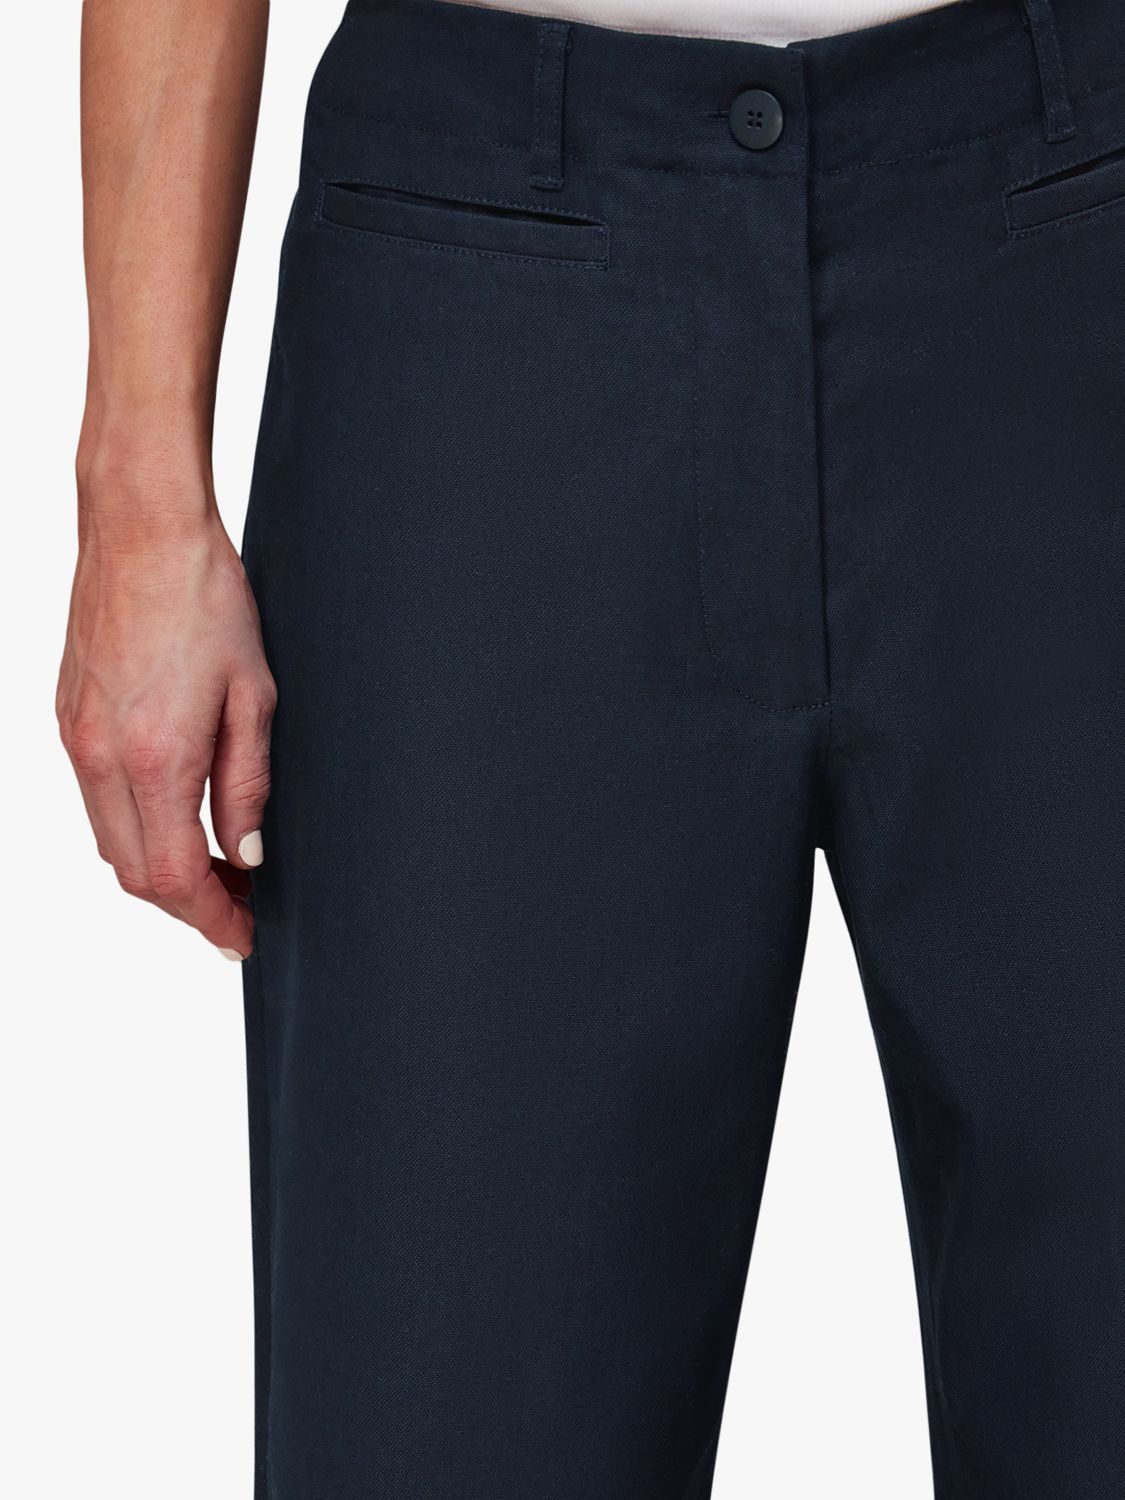 Whistles Petite Amber Chino Trousers, Navy at John Lewis & Partners